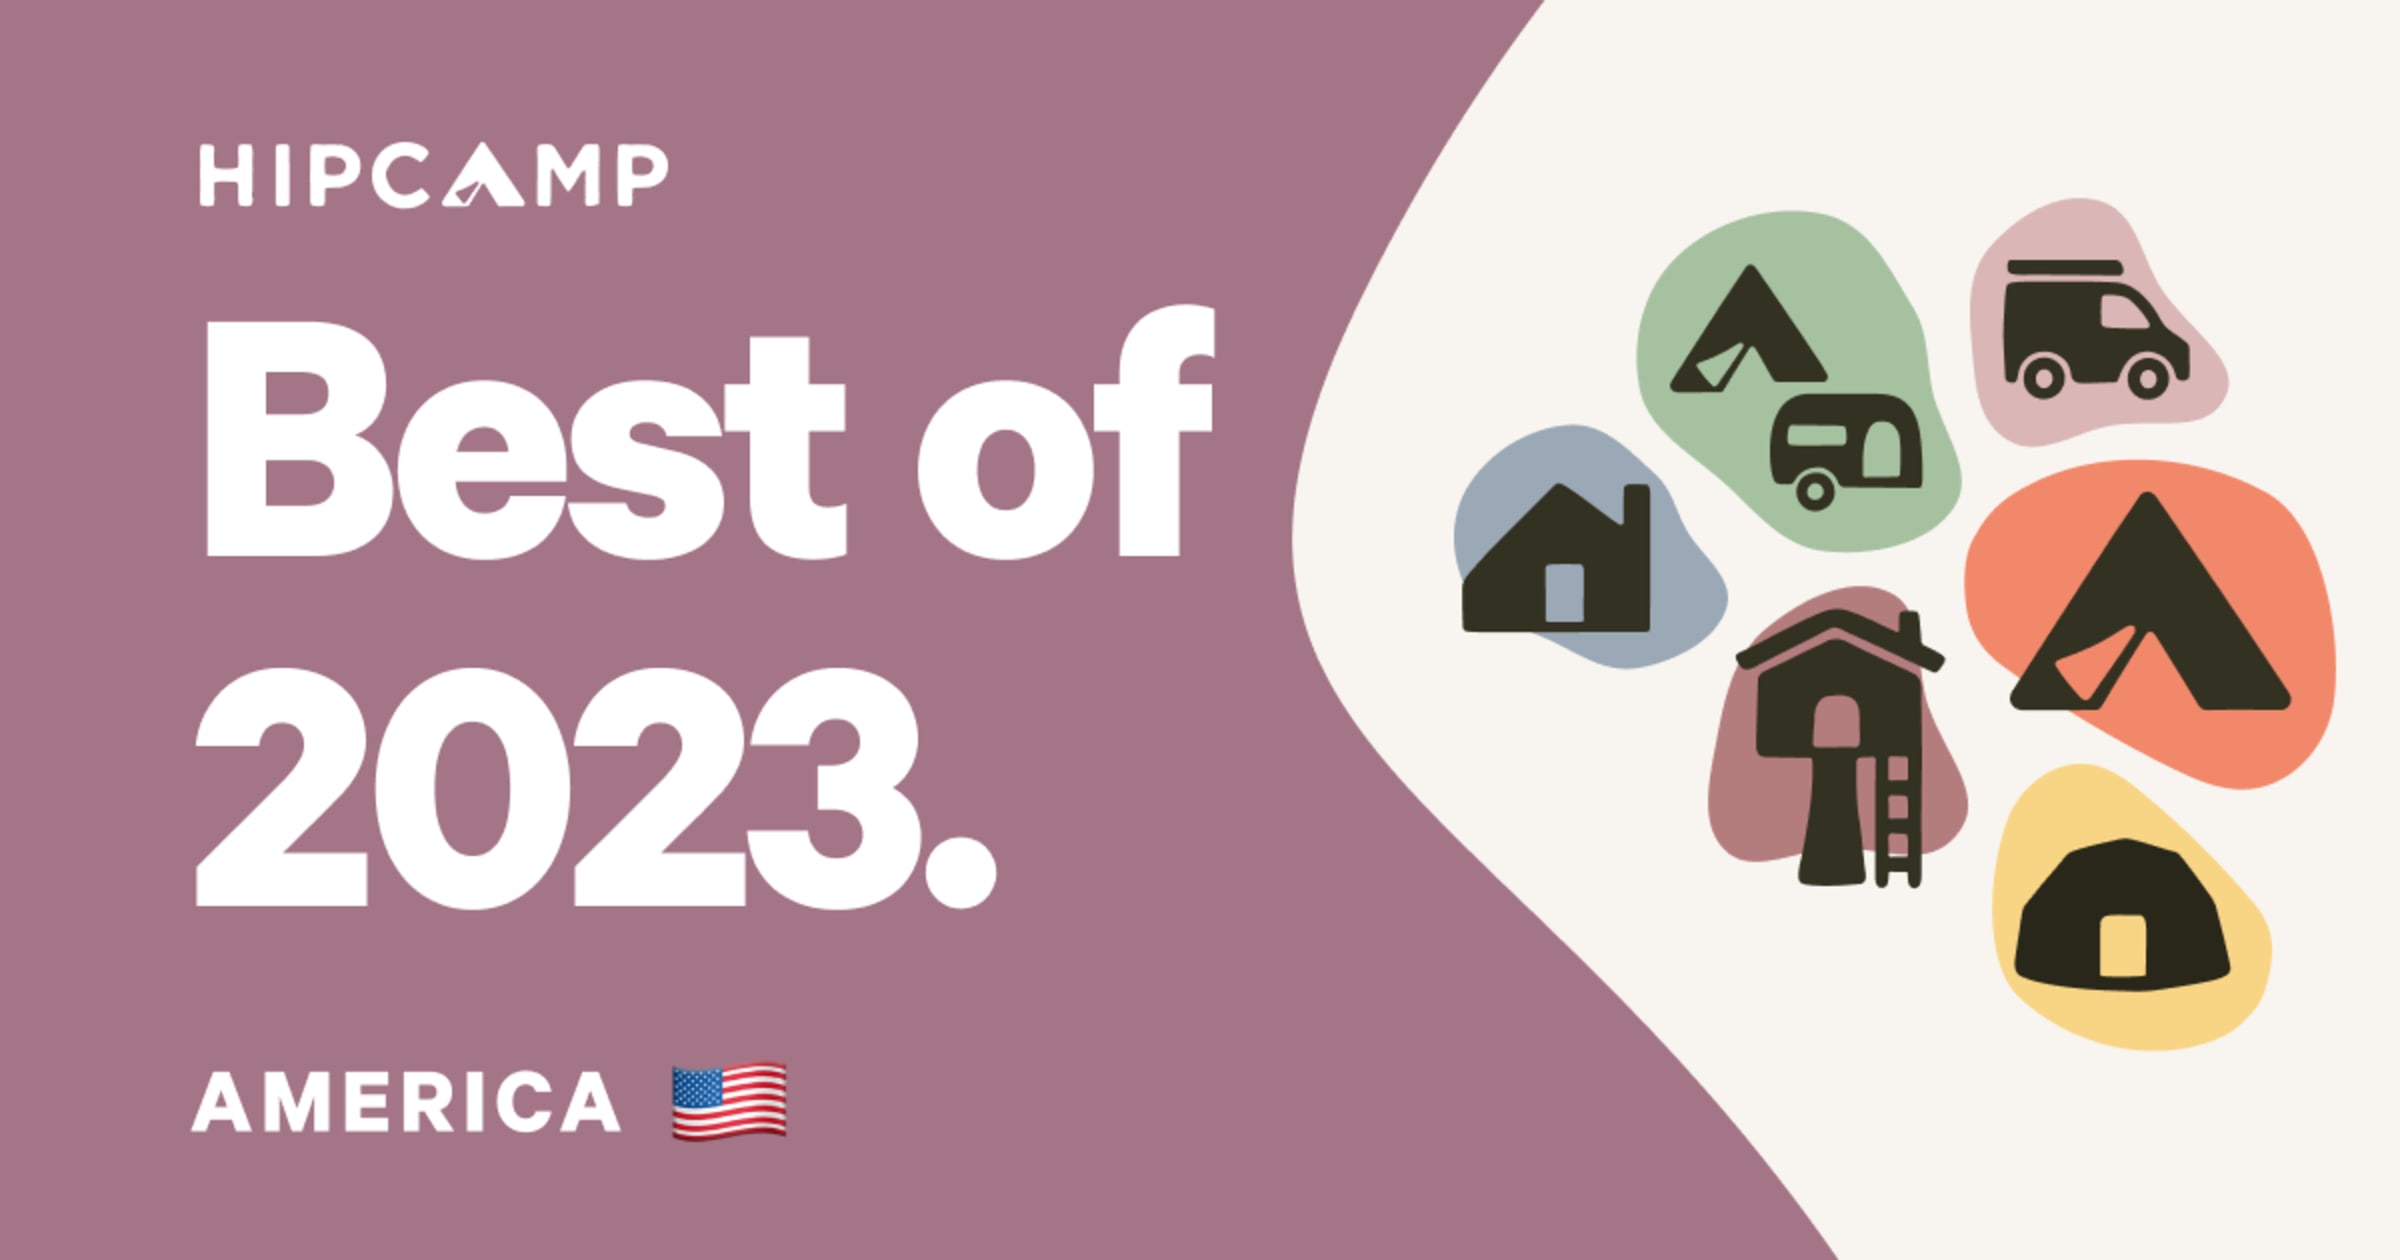 America's Best Hipcamps to Visit in 2023